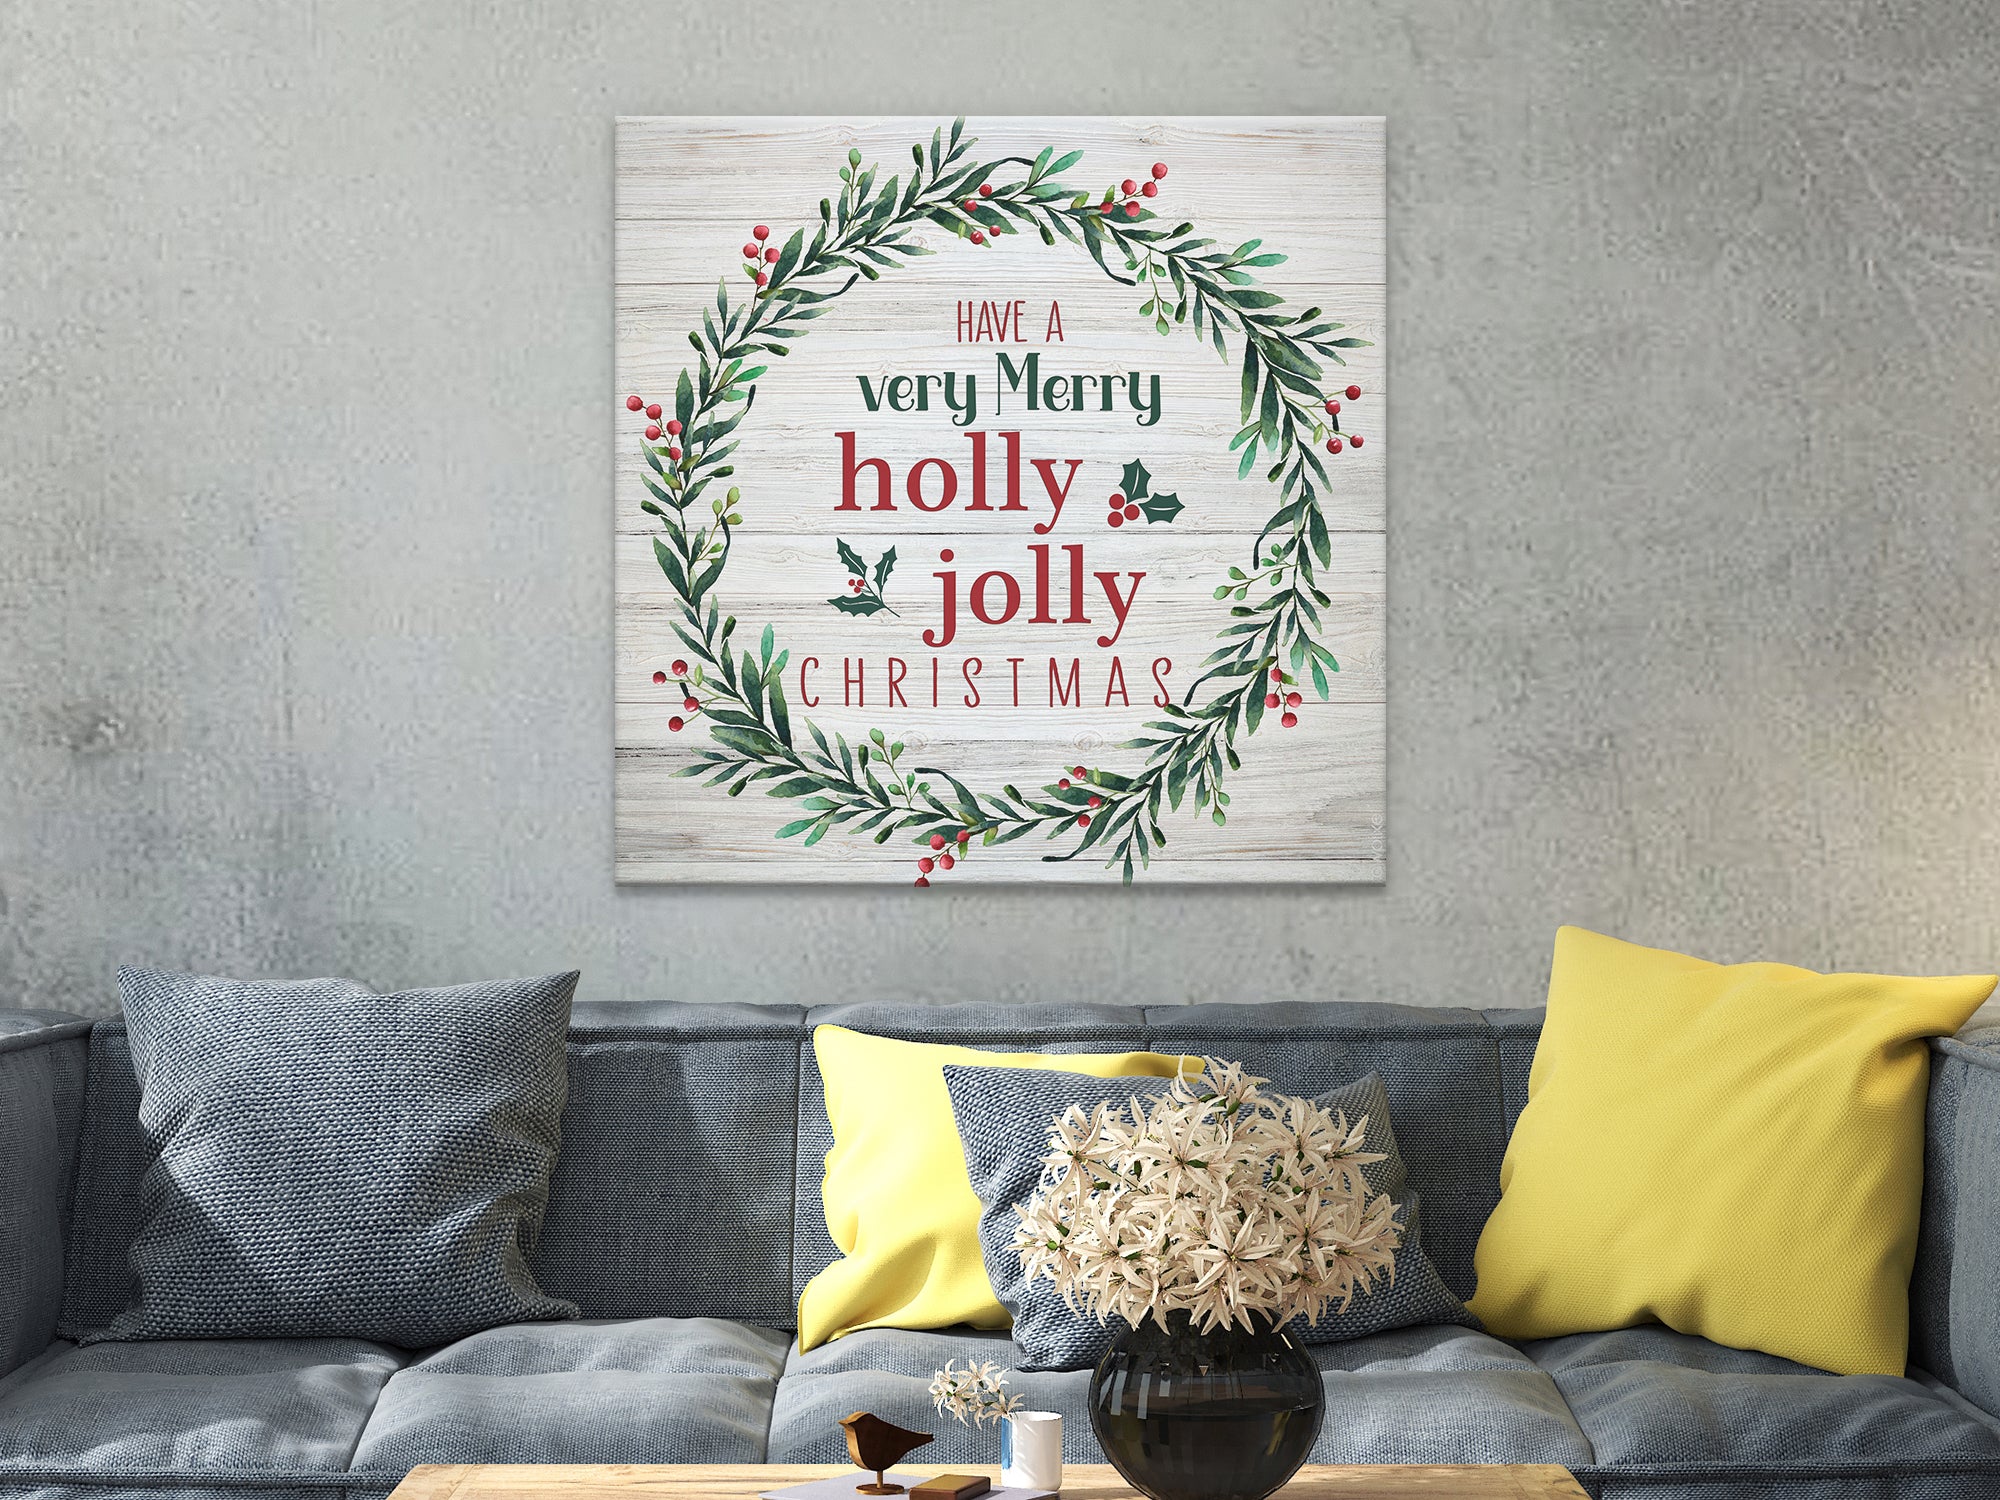 Christmas Holly II | Large Solid-Faced Canvas Wall Art Print | Great Big Canvas